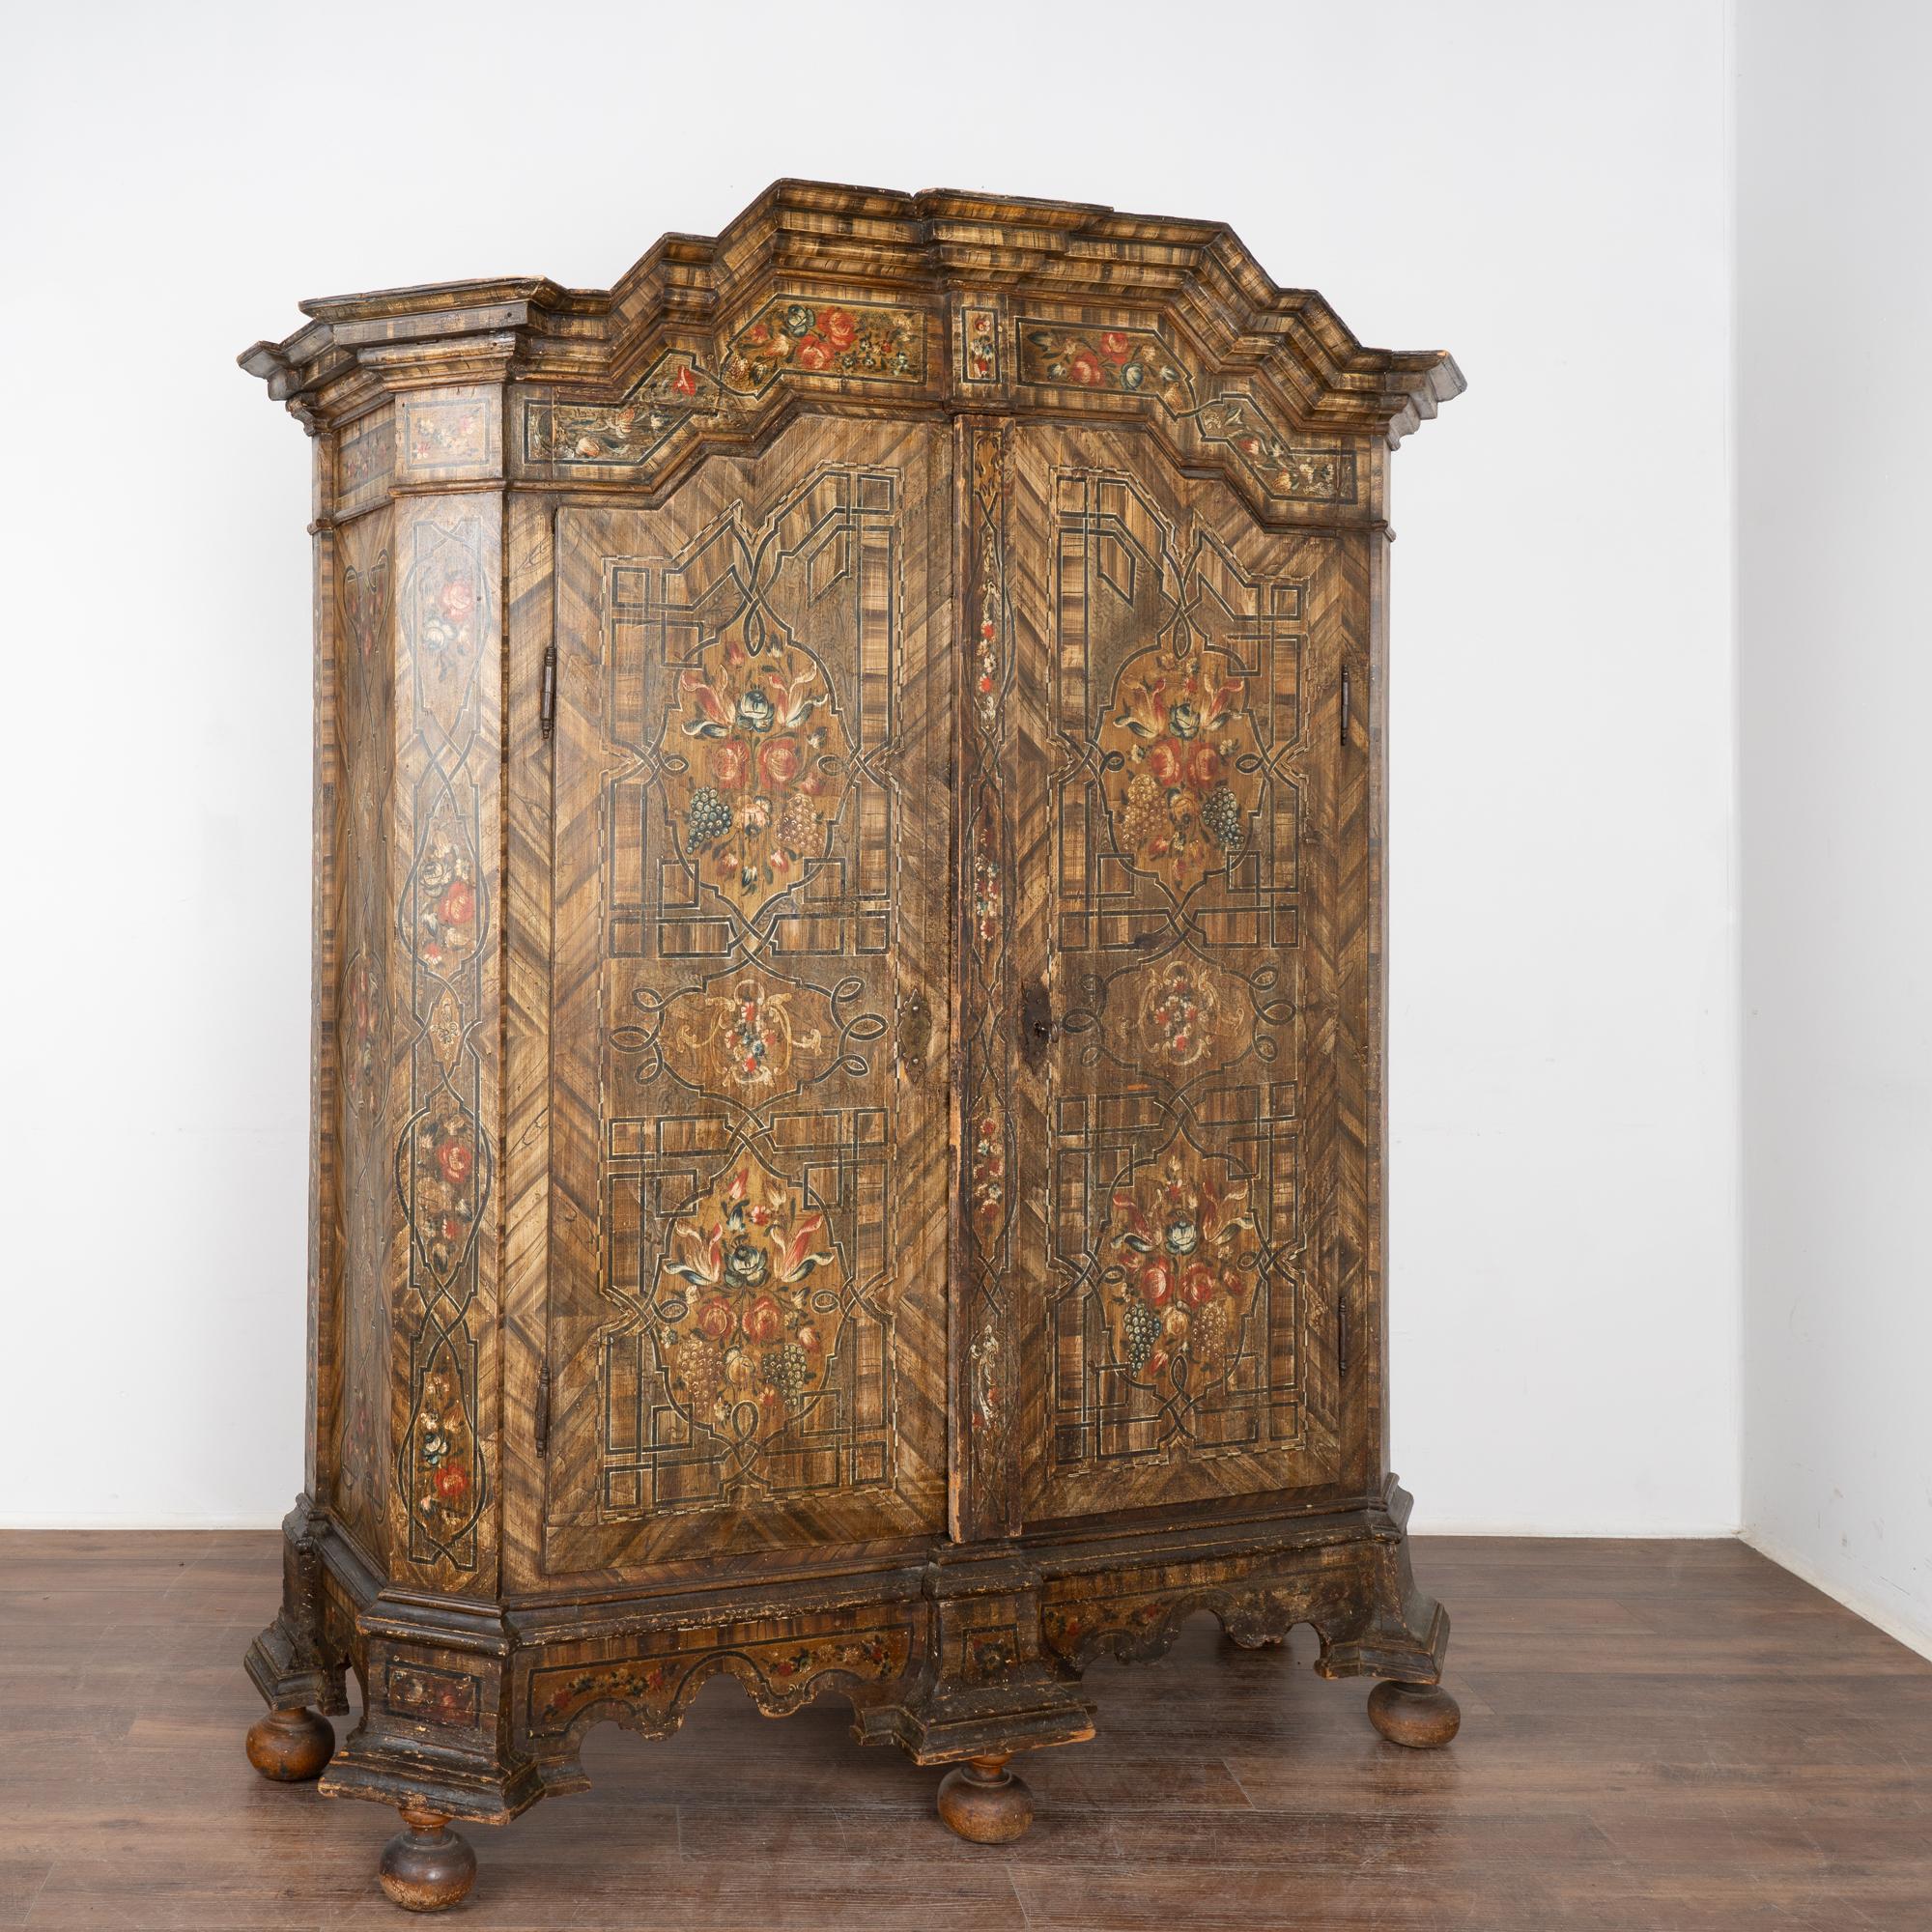 This exceptional armoire still maintains its exquisite original hand-painted details and traditional faux wood background. The earth tones and floral patterns were a typical style element while the geometric border adds a fascinating layer to this